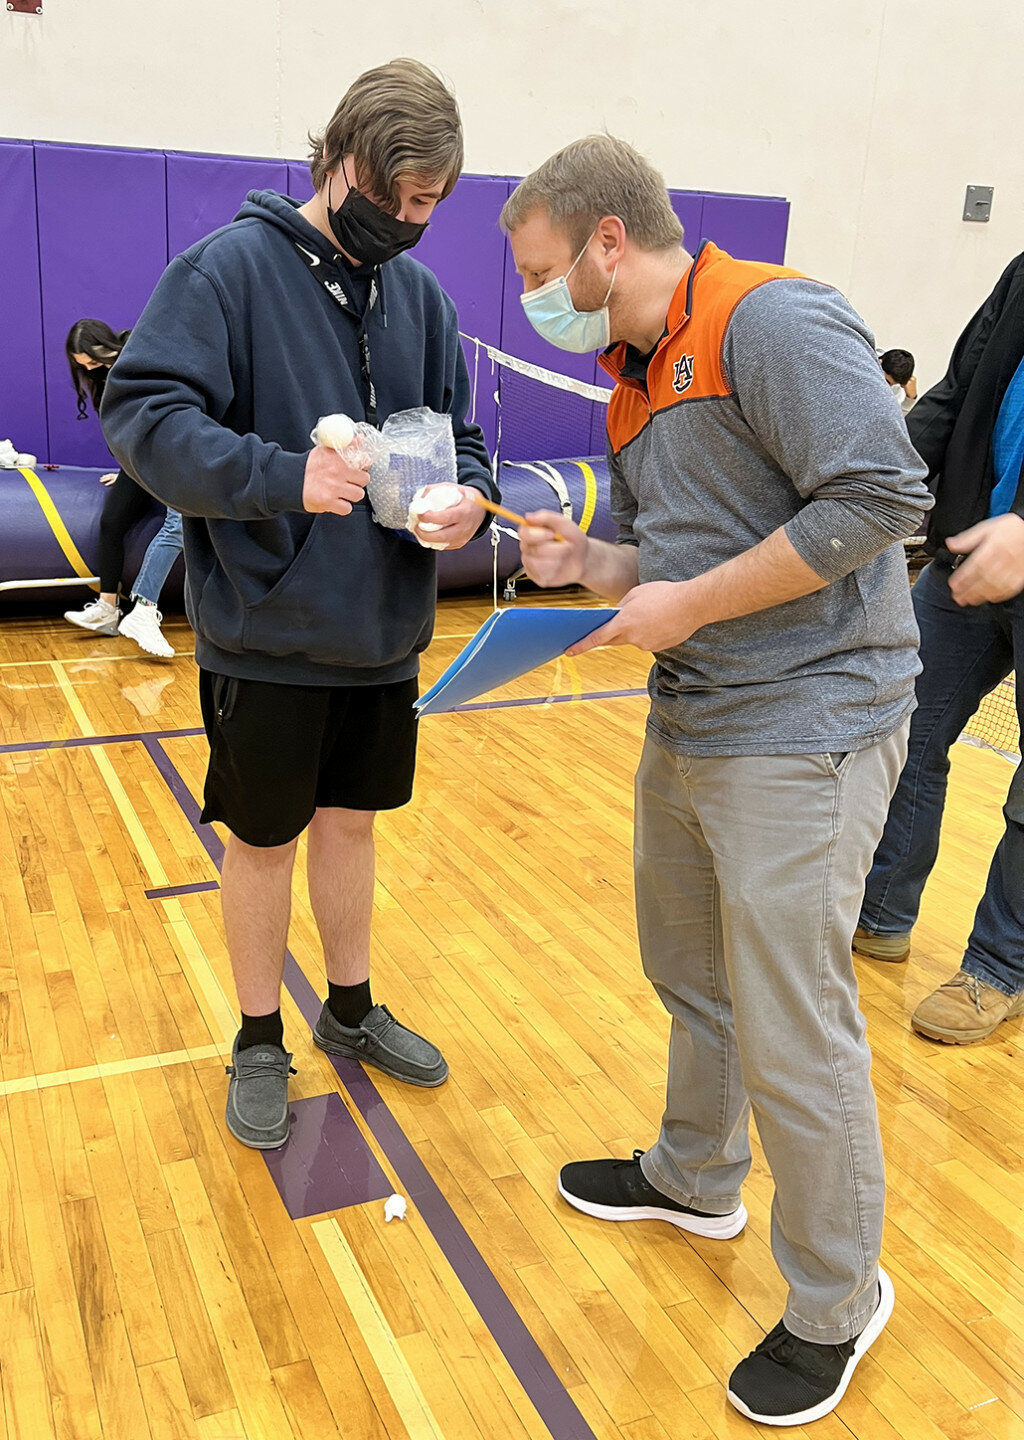 Mendota High School senior Jacob Swope, left, shows teacher Joe Hughes his surviving egg after withstanding a drop from 8 meters (about 26 feet) during an egg drop project in physics class. MHS students and staff, as well as visitors to MHS, will be required to continue to wear face masks while in the building.